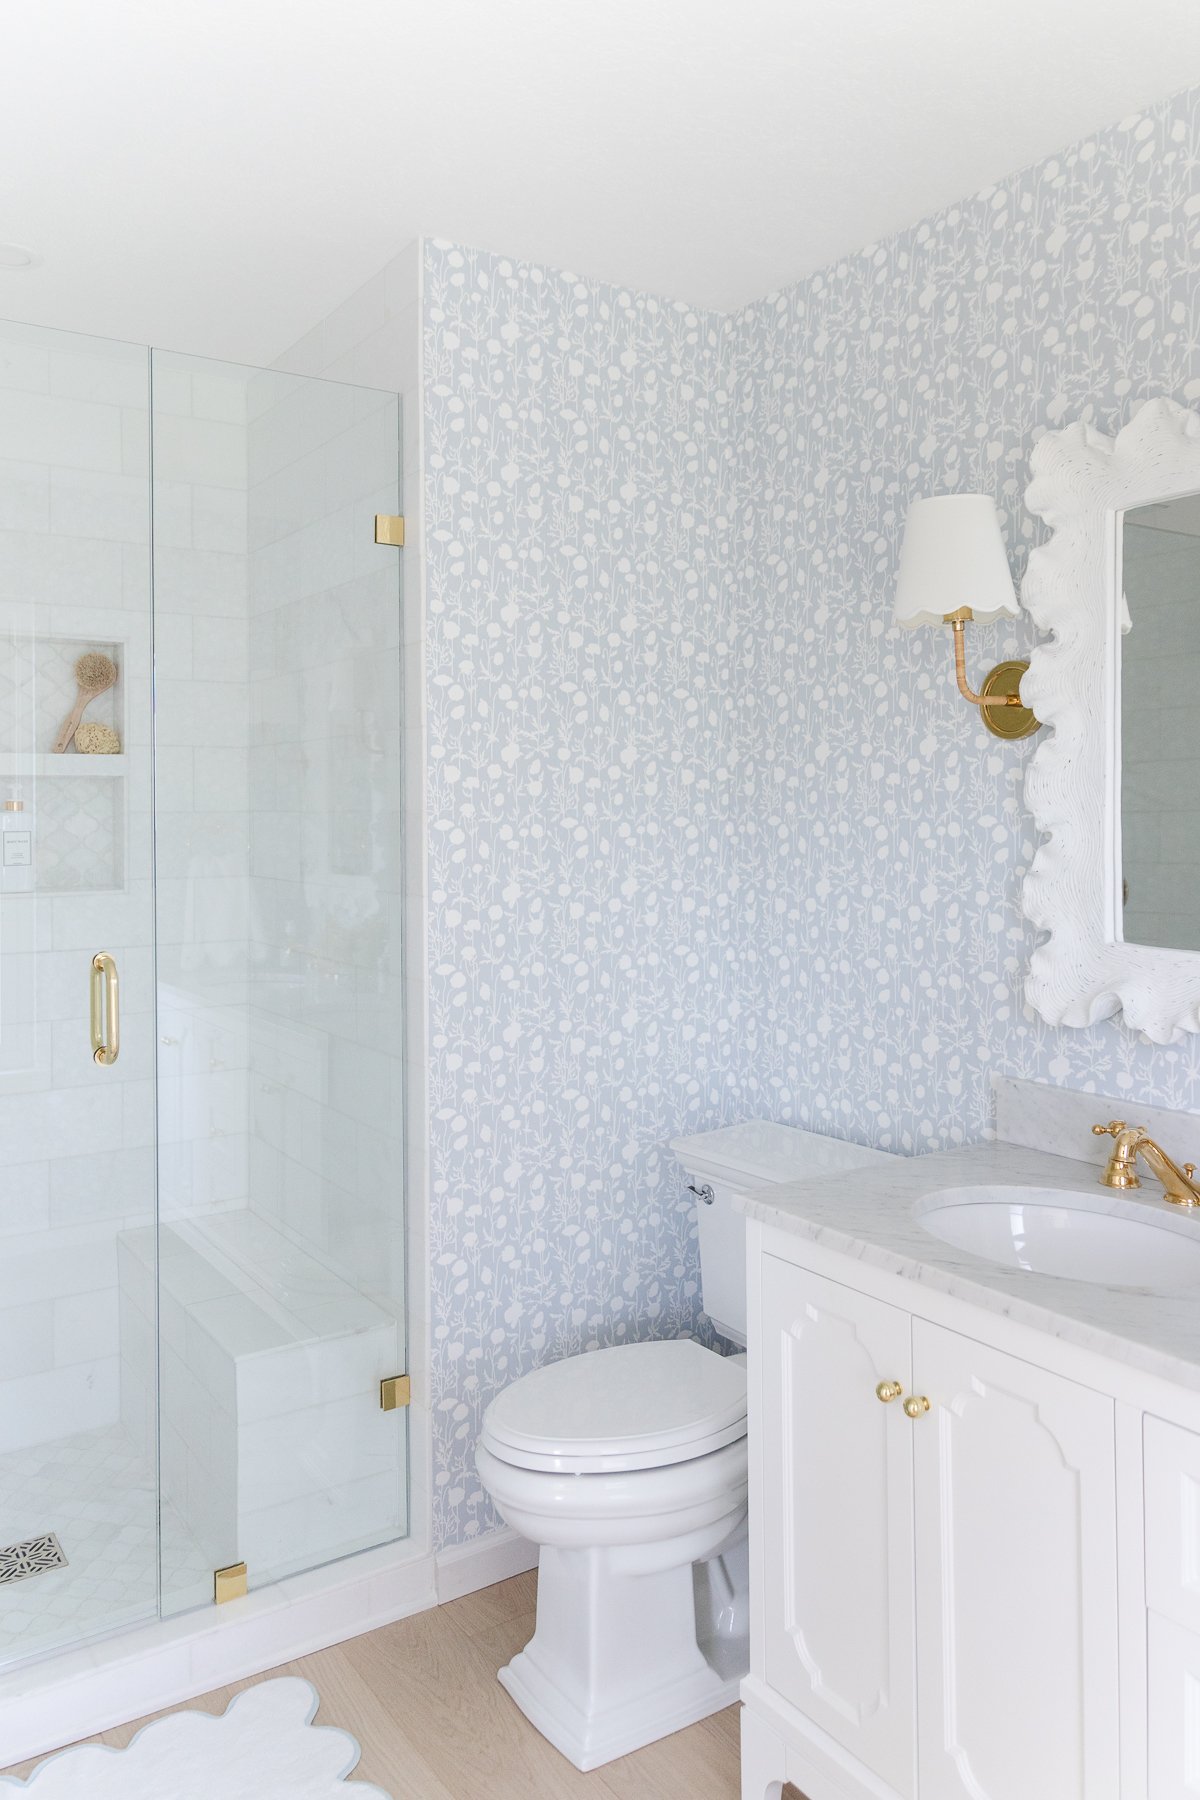 A white bathroom with a glass shower stall featuring Serena and Lily wallpaper.